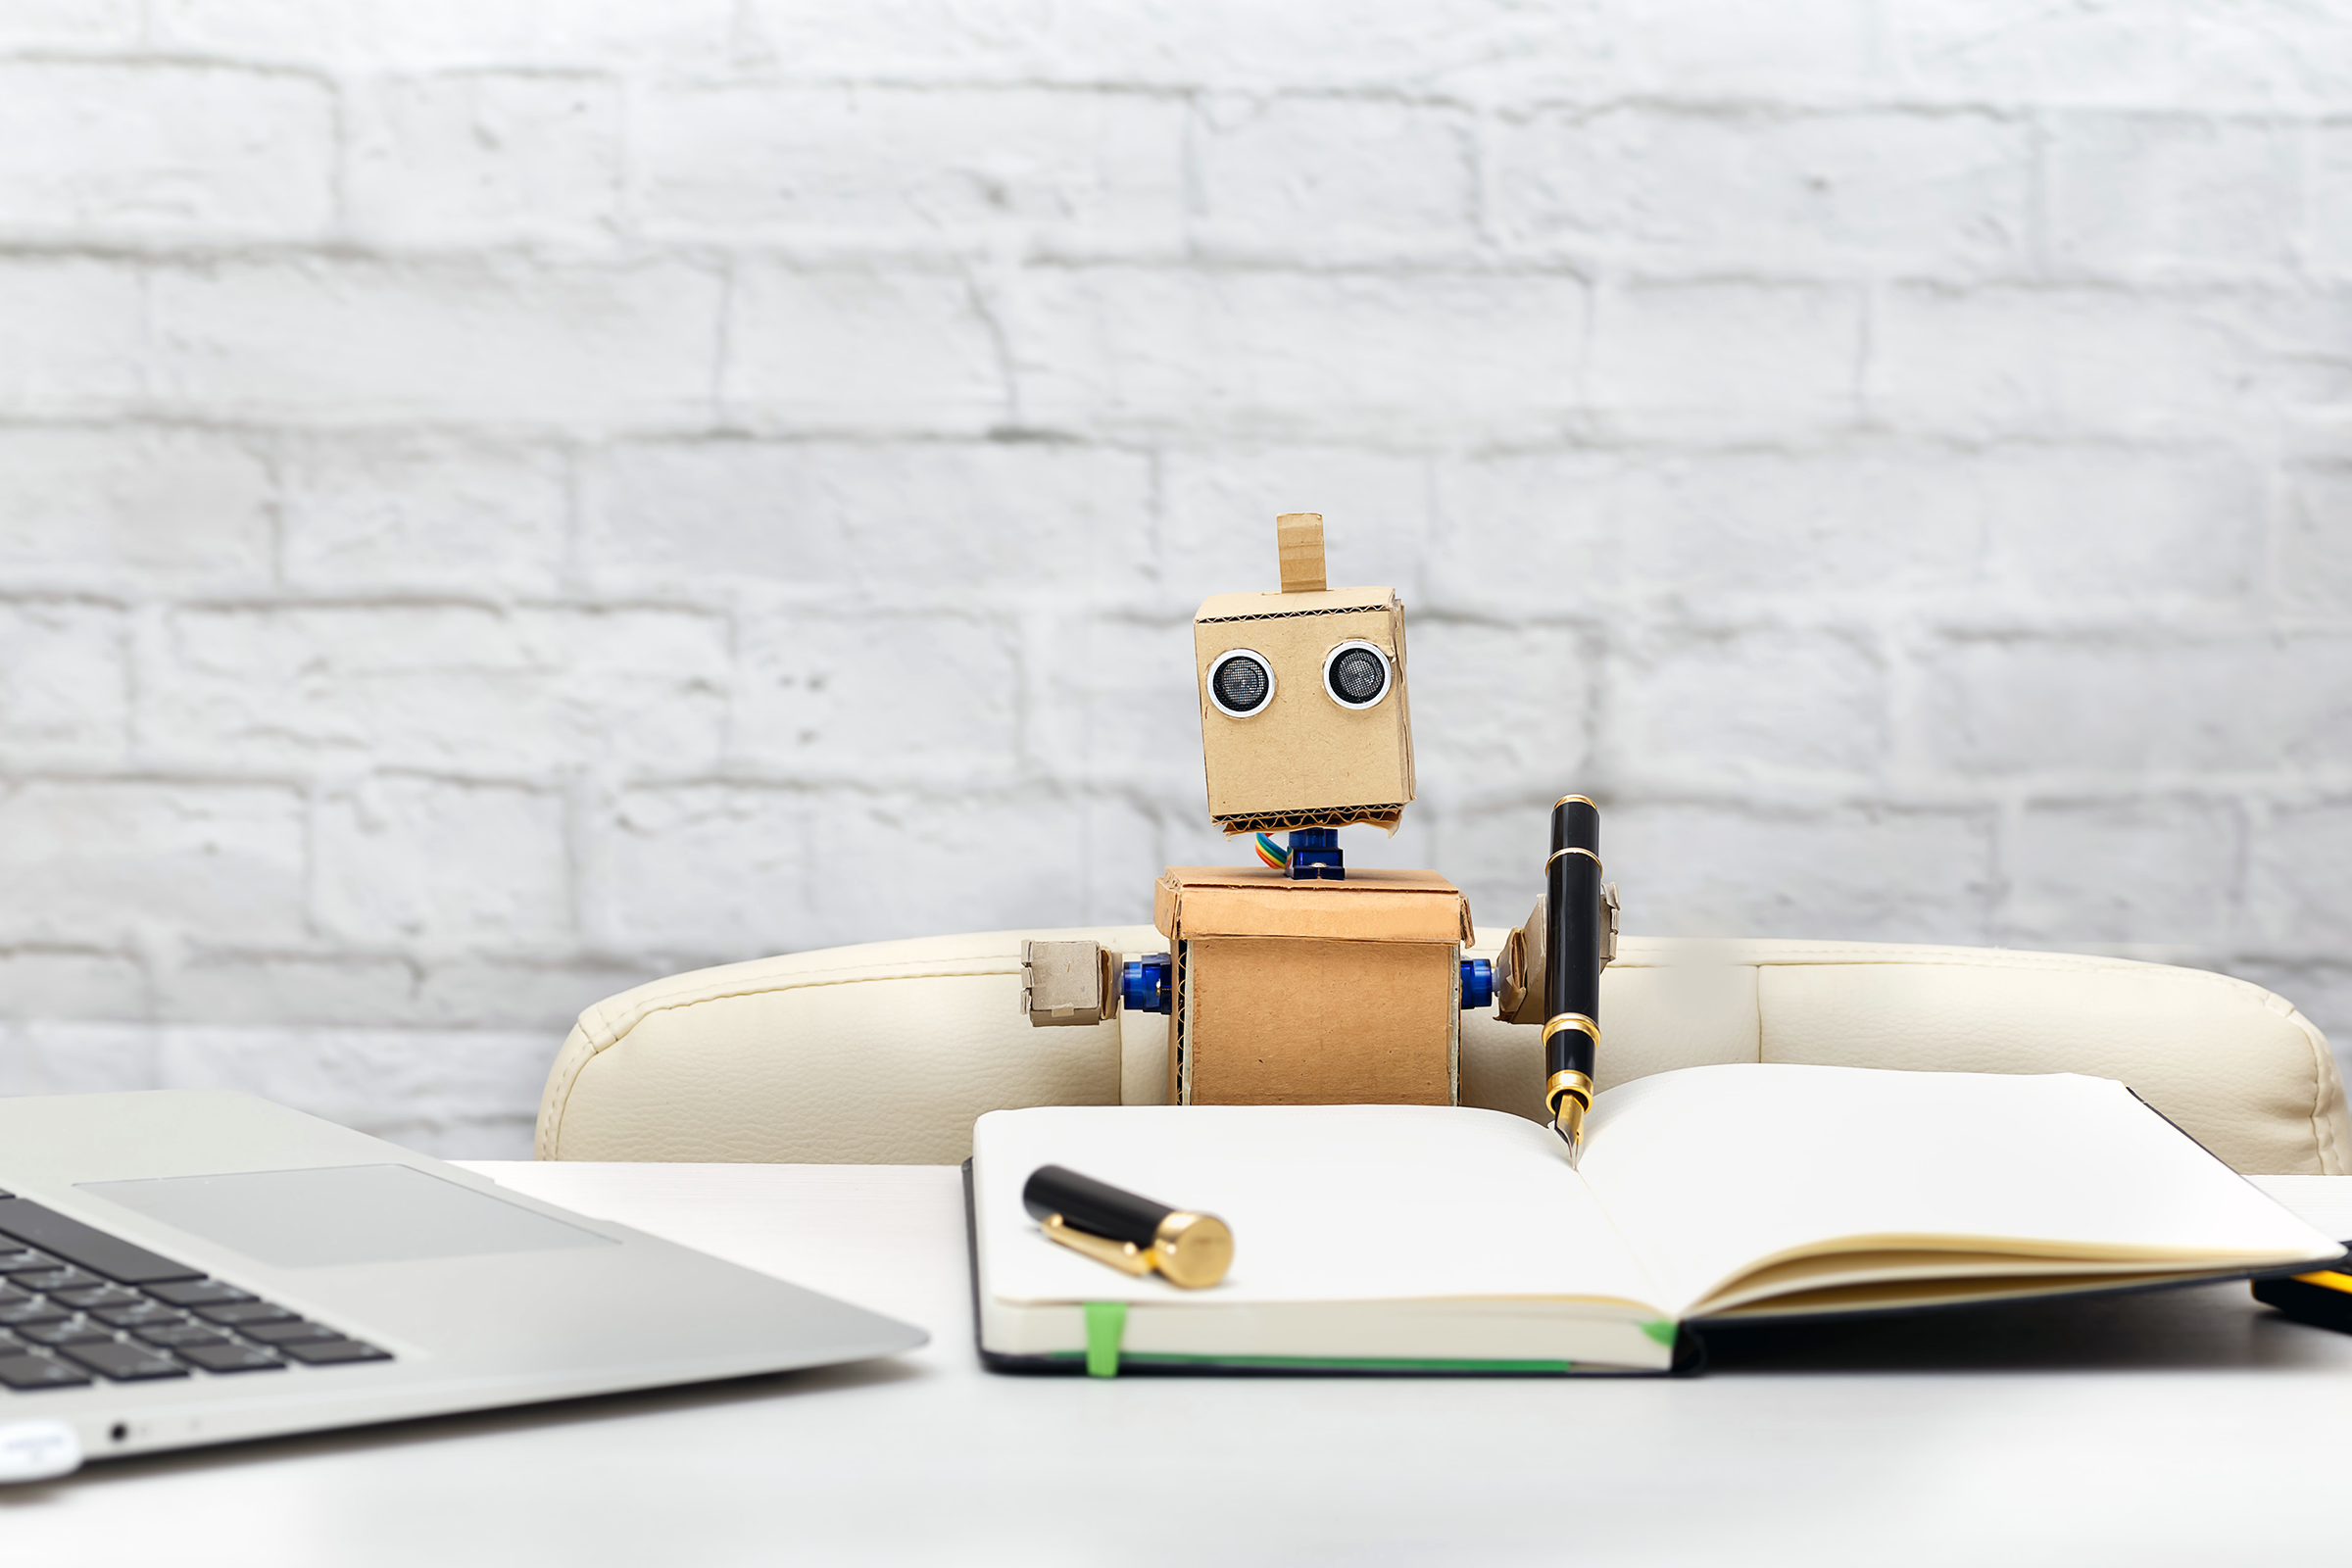 Automation, education, and the future of work: a reading list